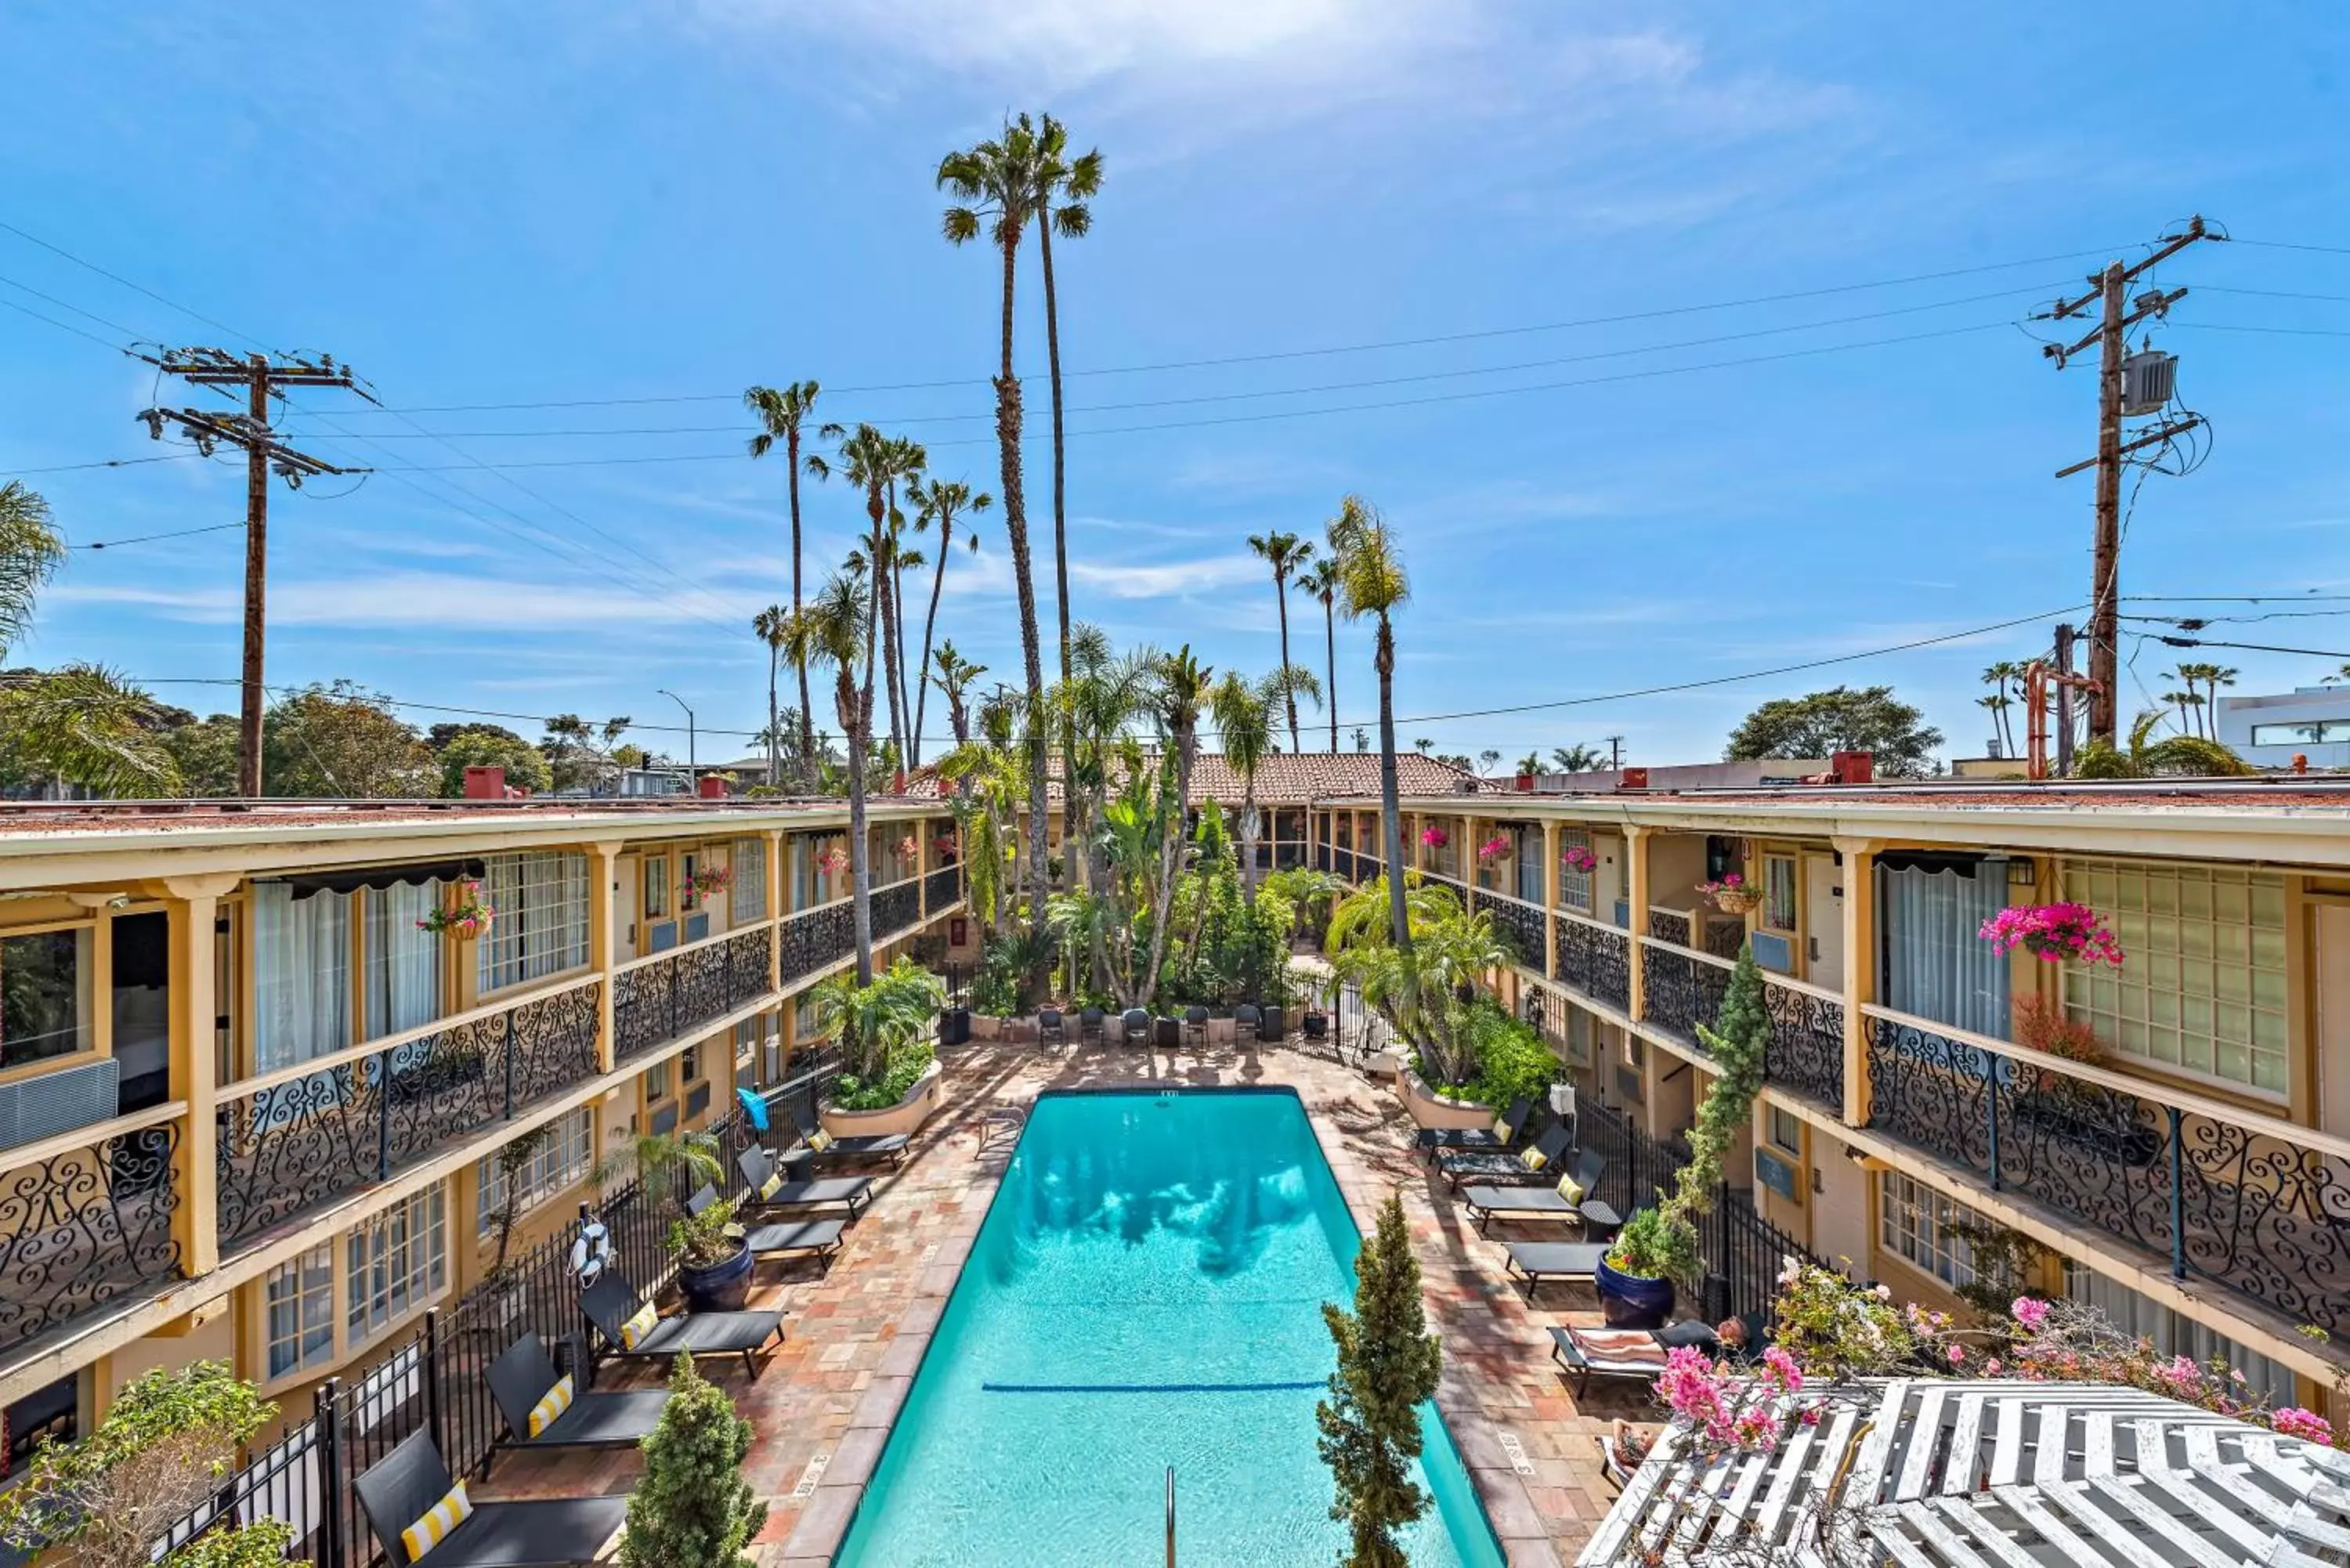 Property building, Pool View in 14 West Hotel Laguna Beach